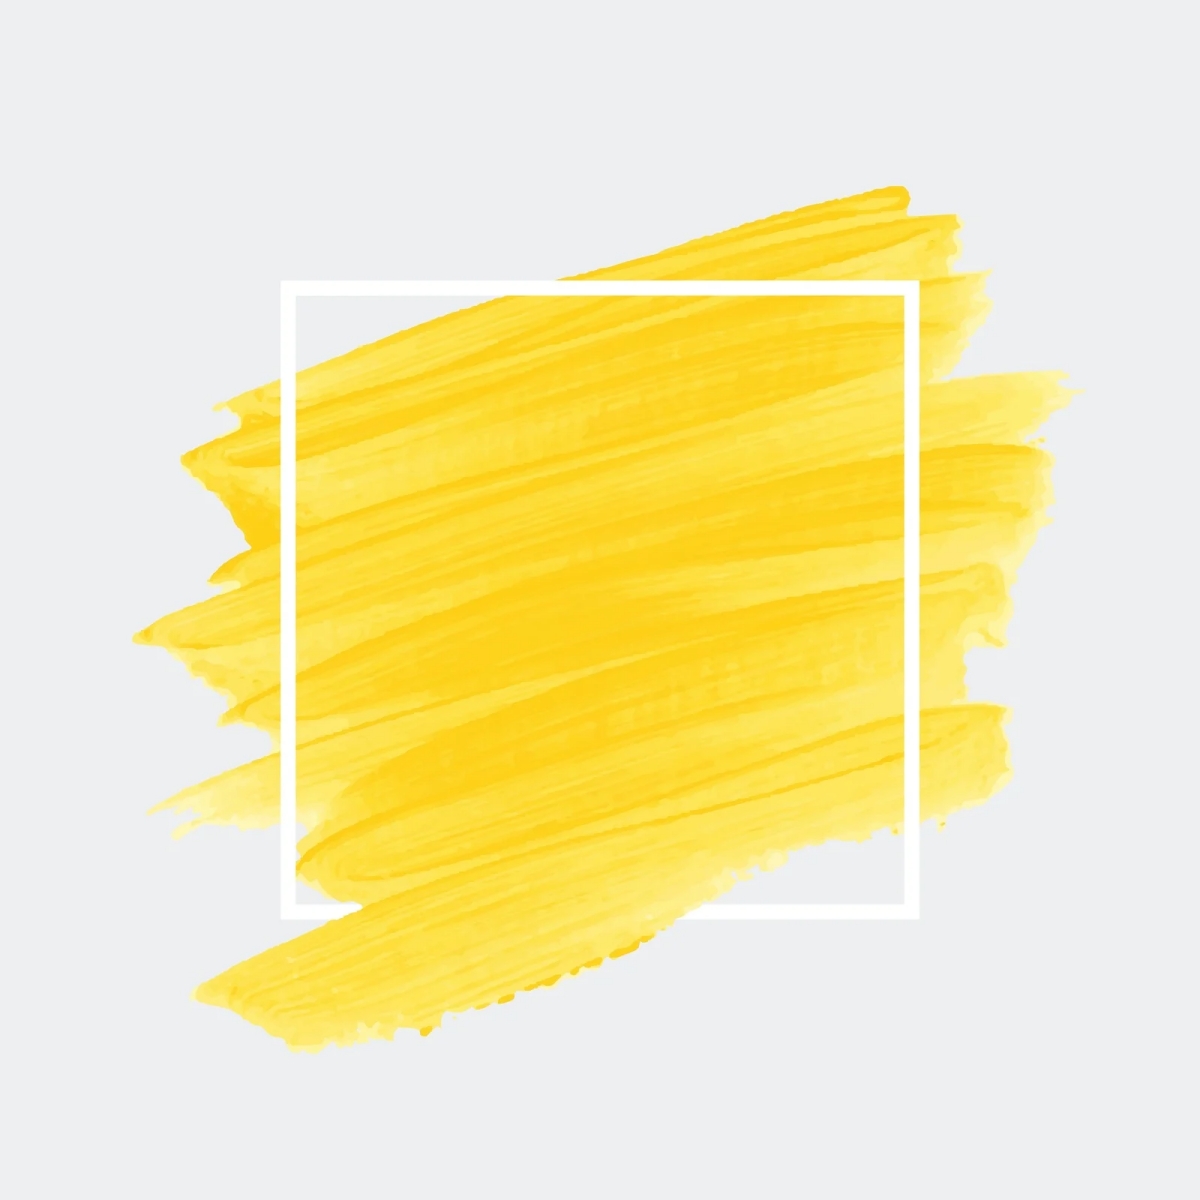 What Colors Make Yellow: A Guide for Painters and Designers